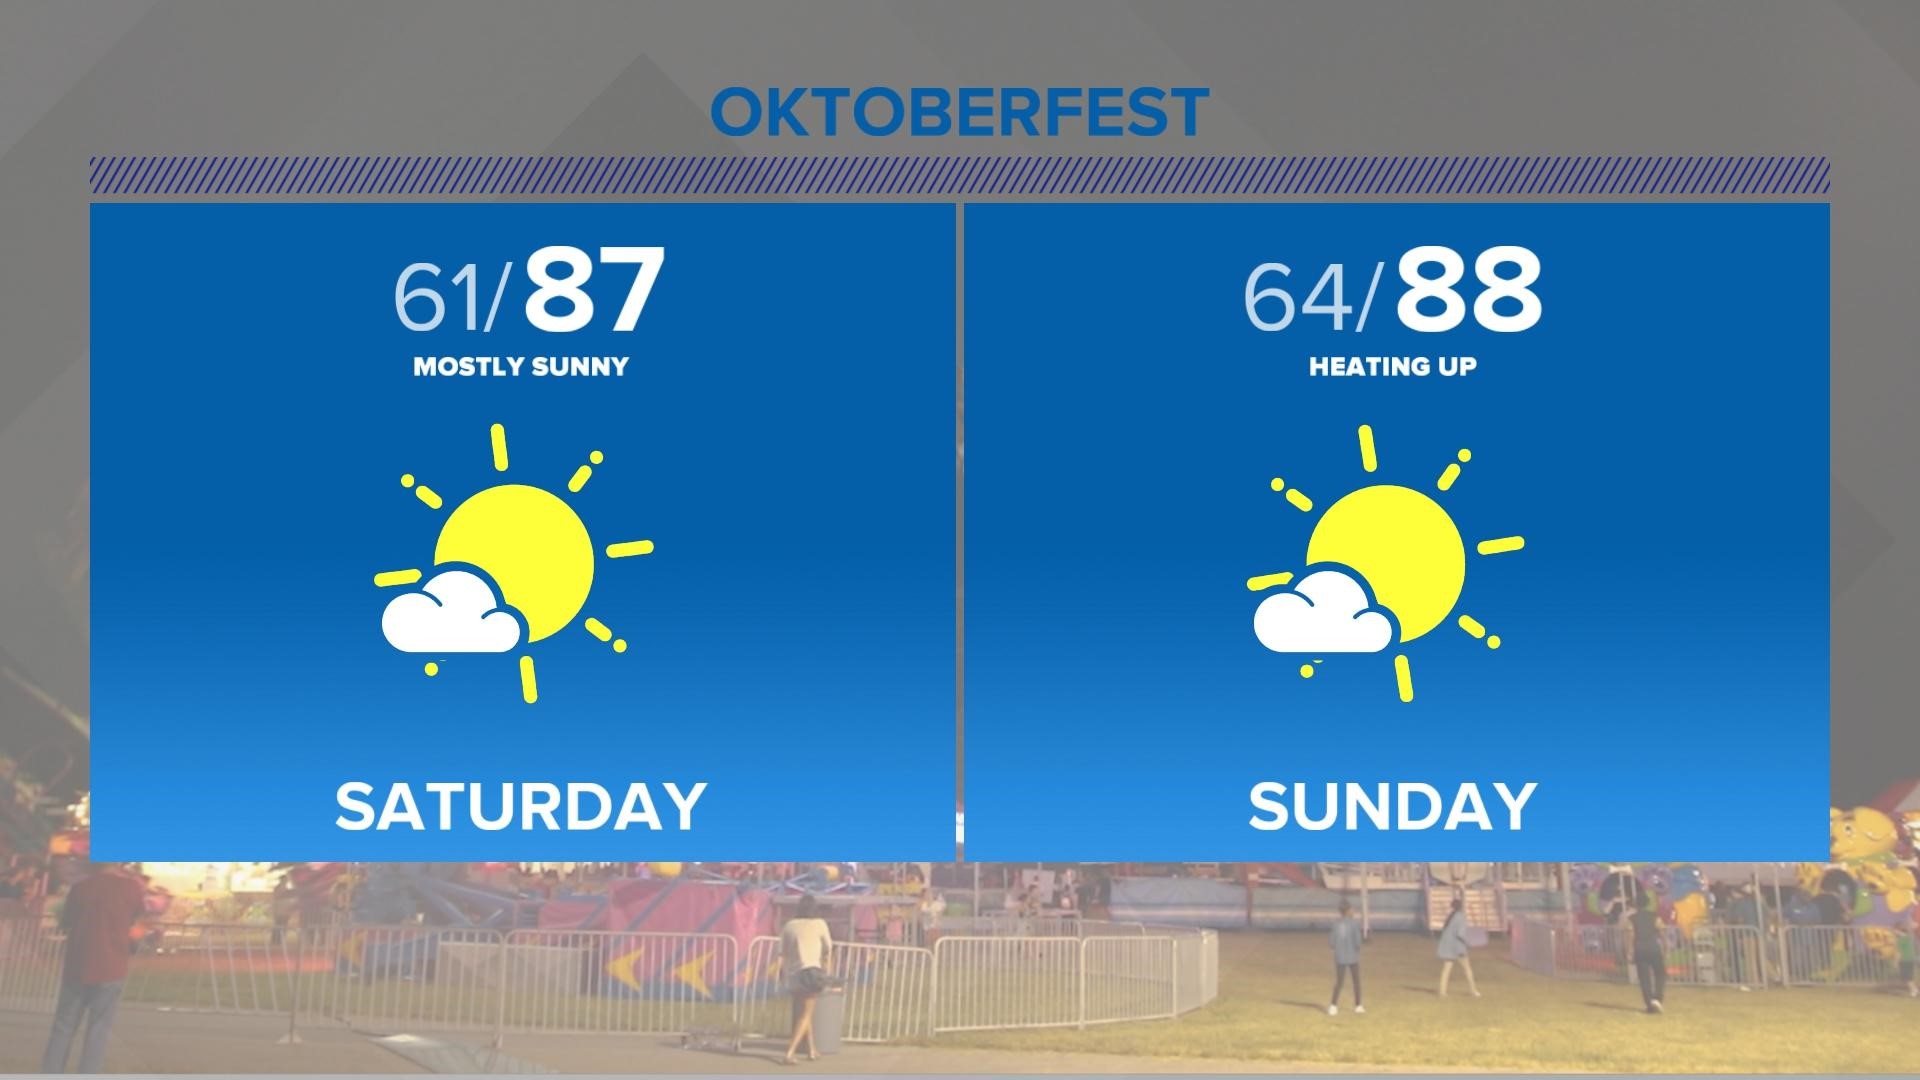 Oktoberfest weekend at Redstone Arsenal is here and the weather will be beautiful.